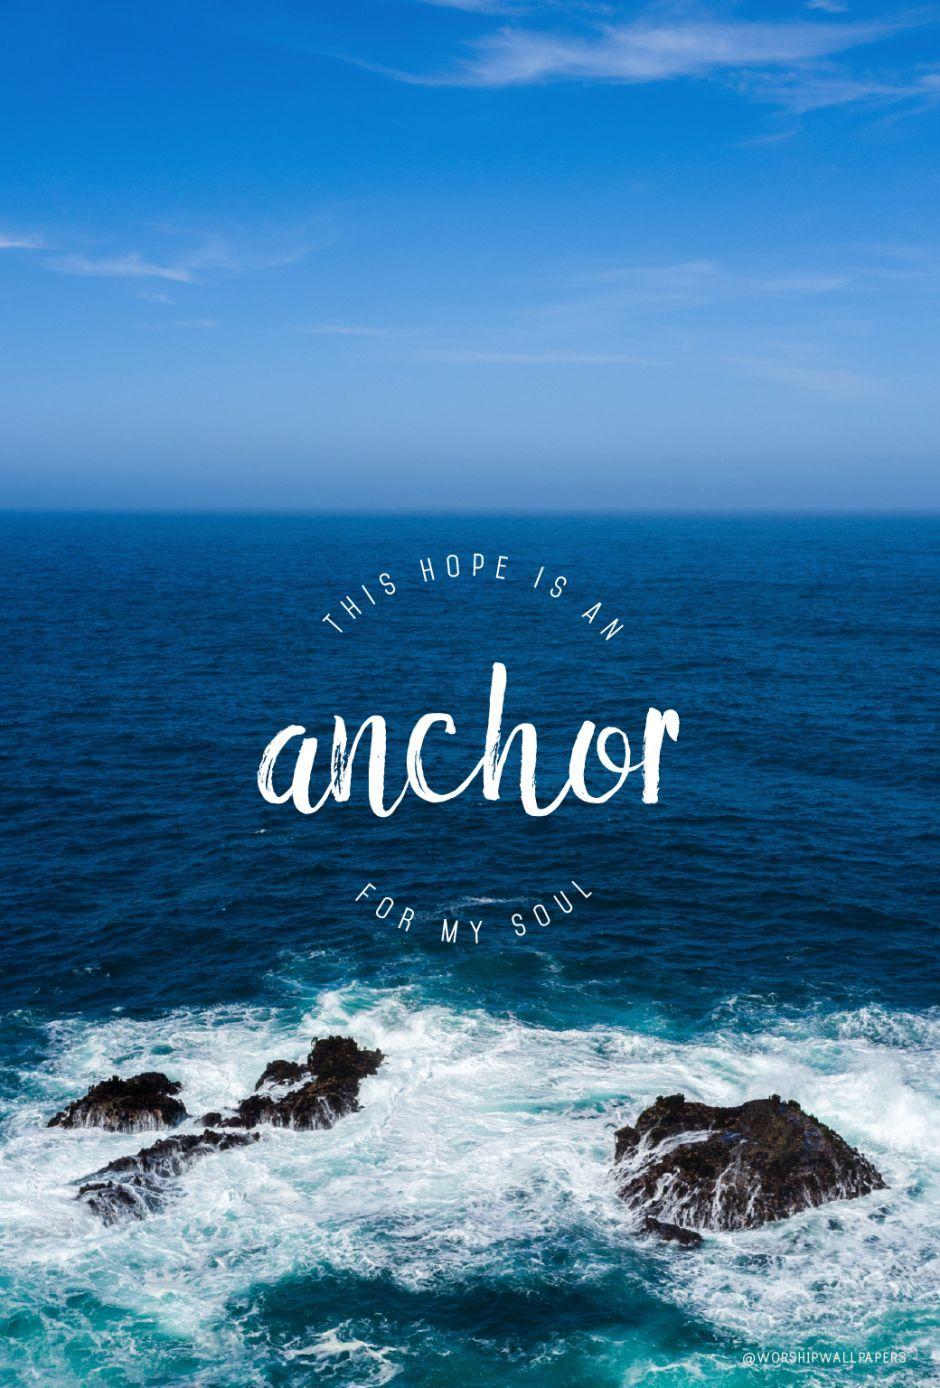 Anchor by Hillsong United // Phone screen wallpaper format // Like